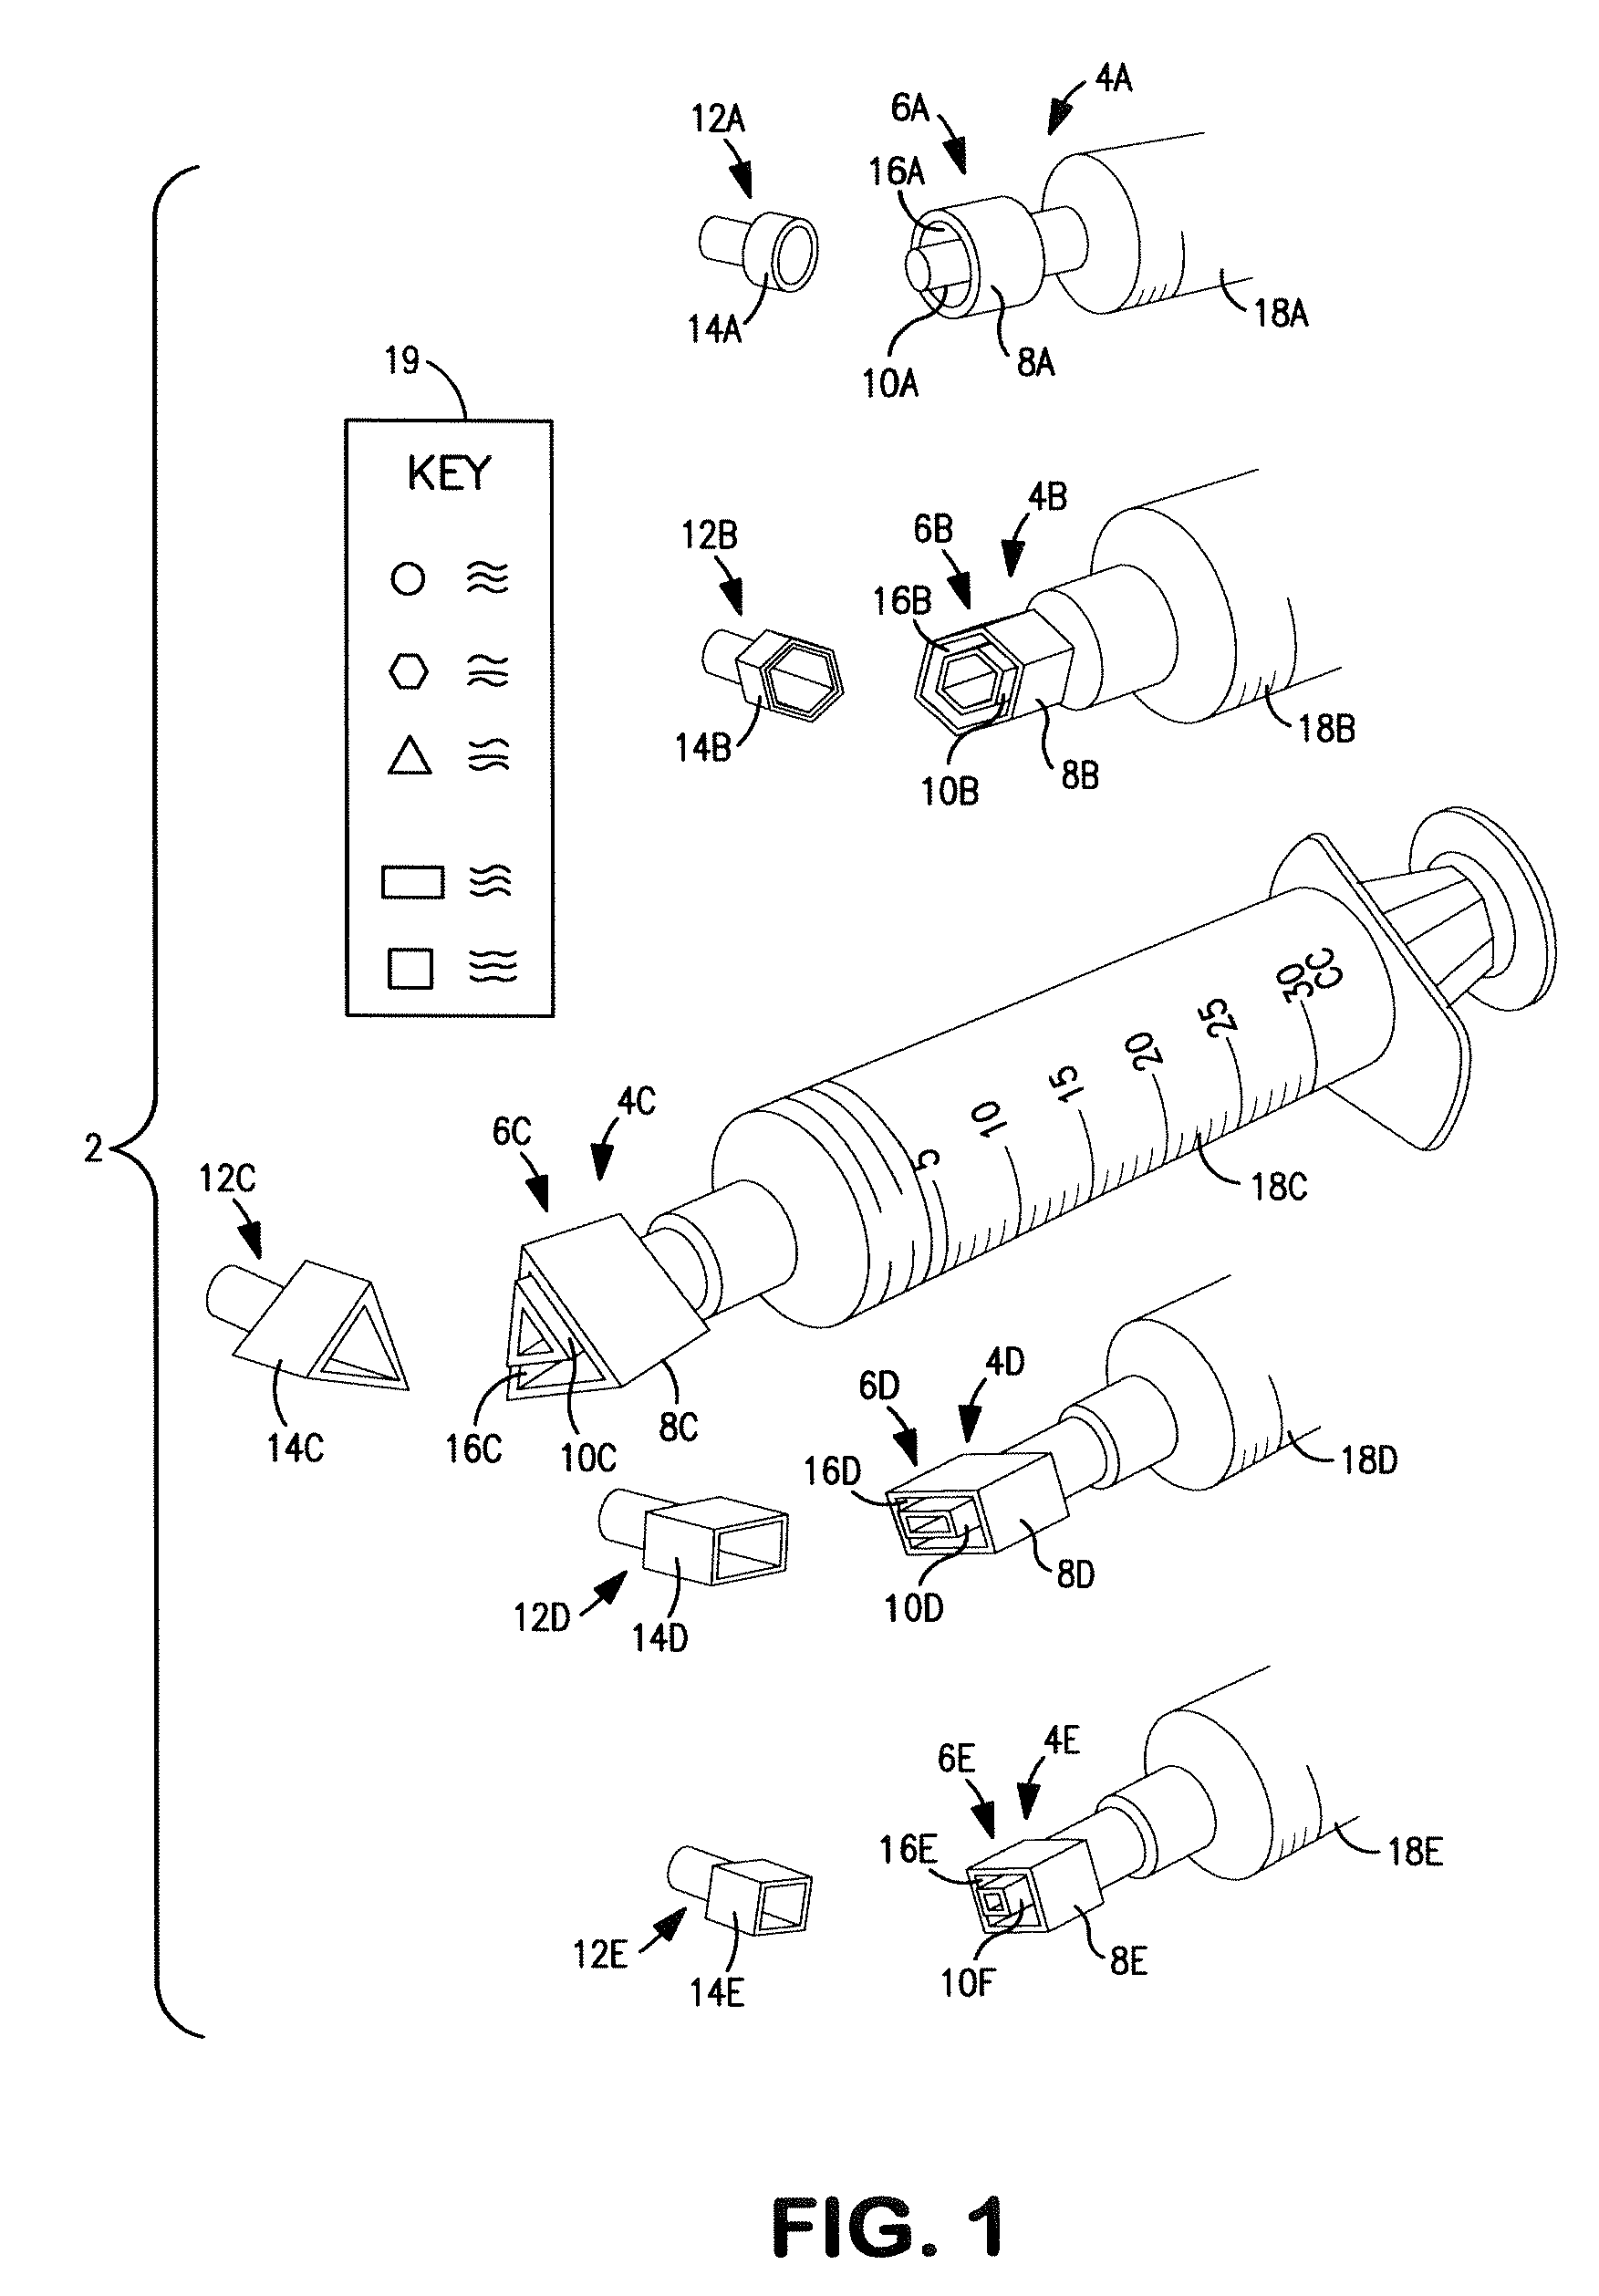 Drug delivery route-based connector system and method